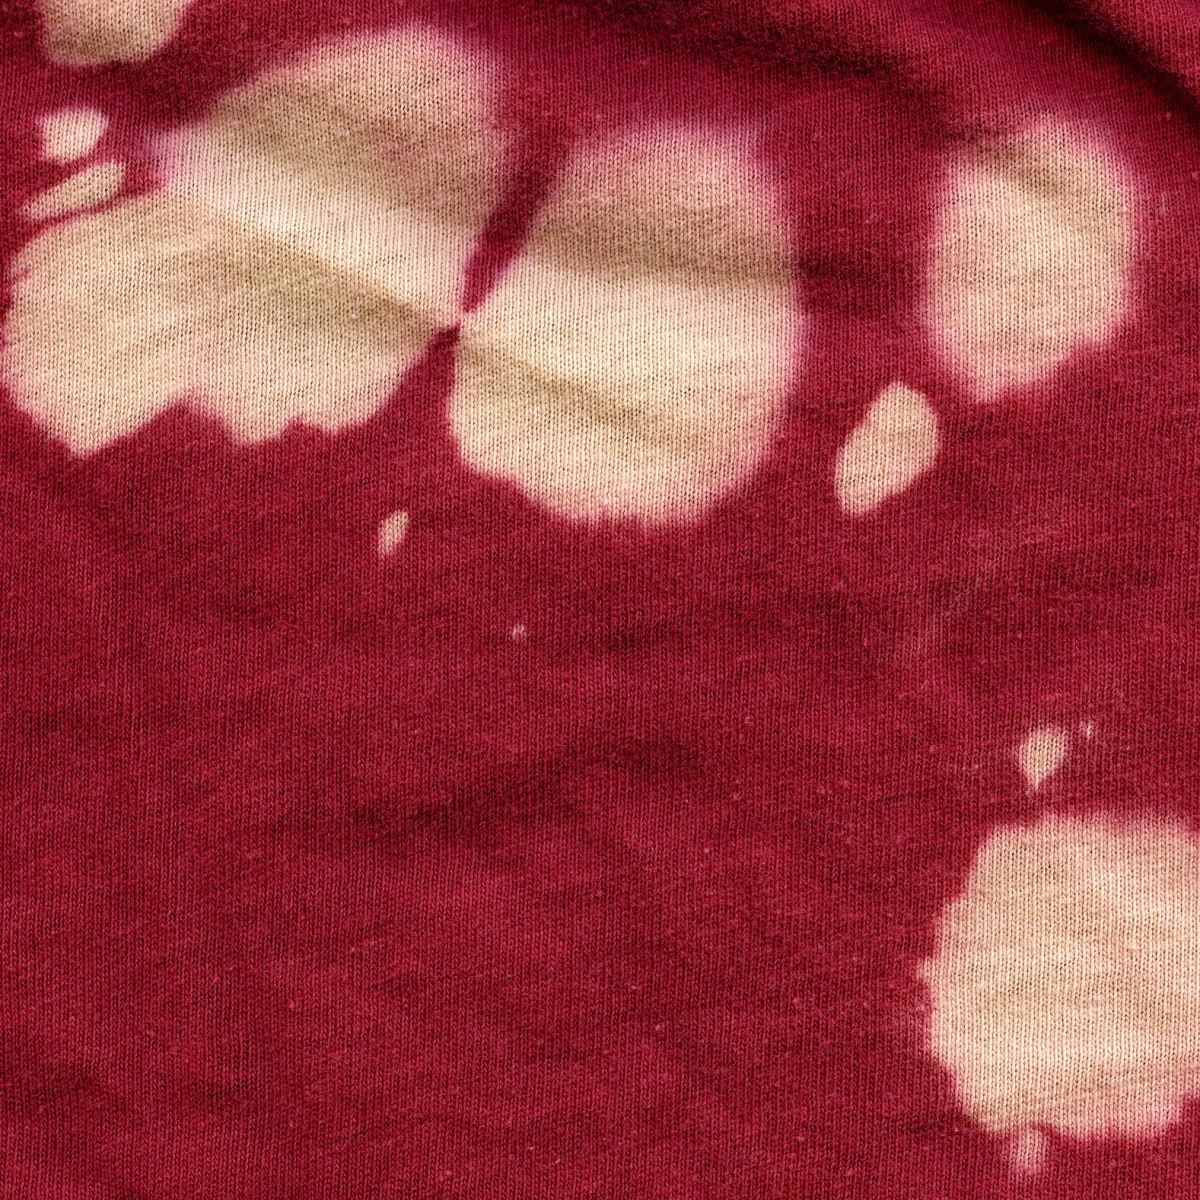 Removing Bleach Stains From Clothing | ThriftyFun